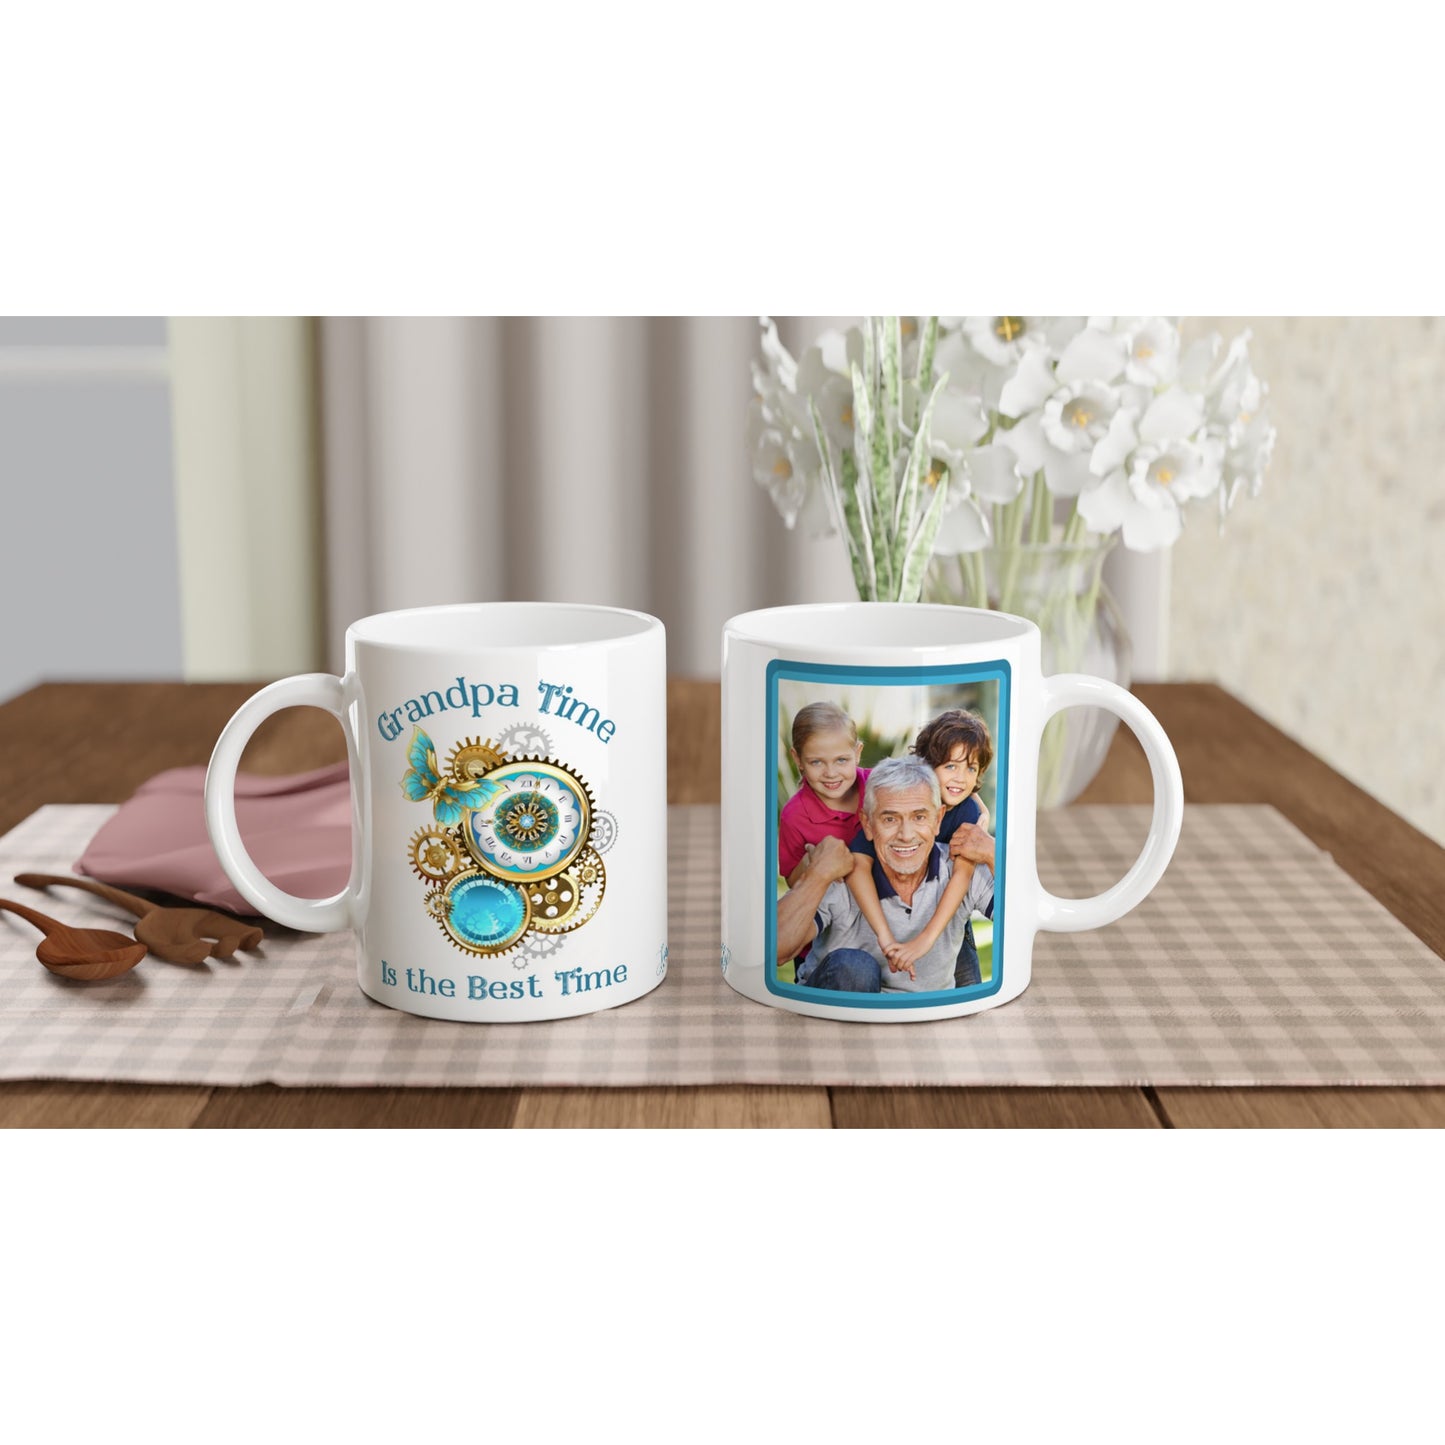 Photo of "Grandpa Time is the Best Time" Customizable Photo Mug 11 oz. on table